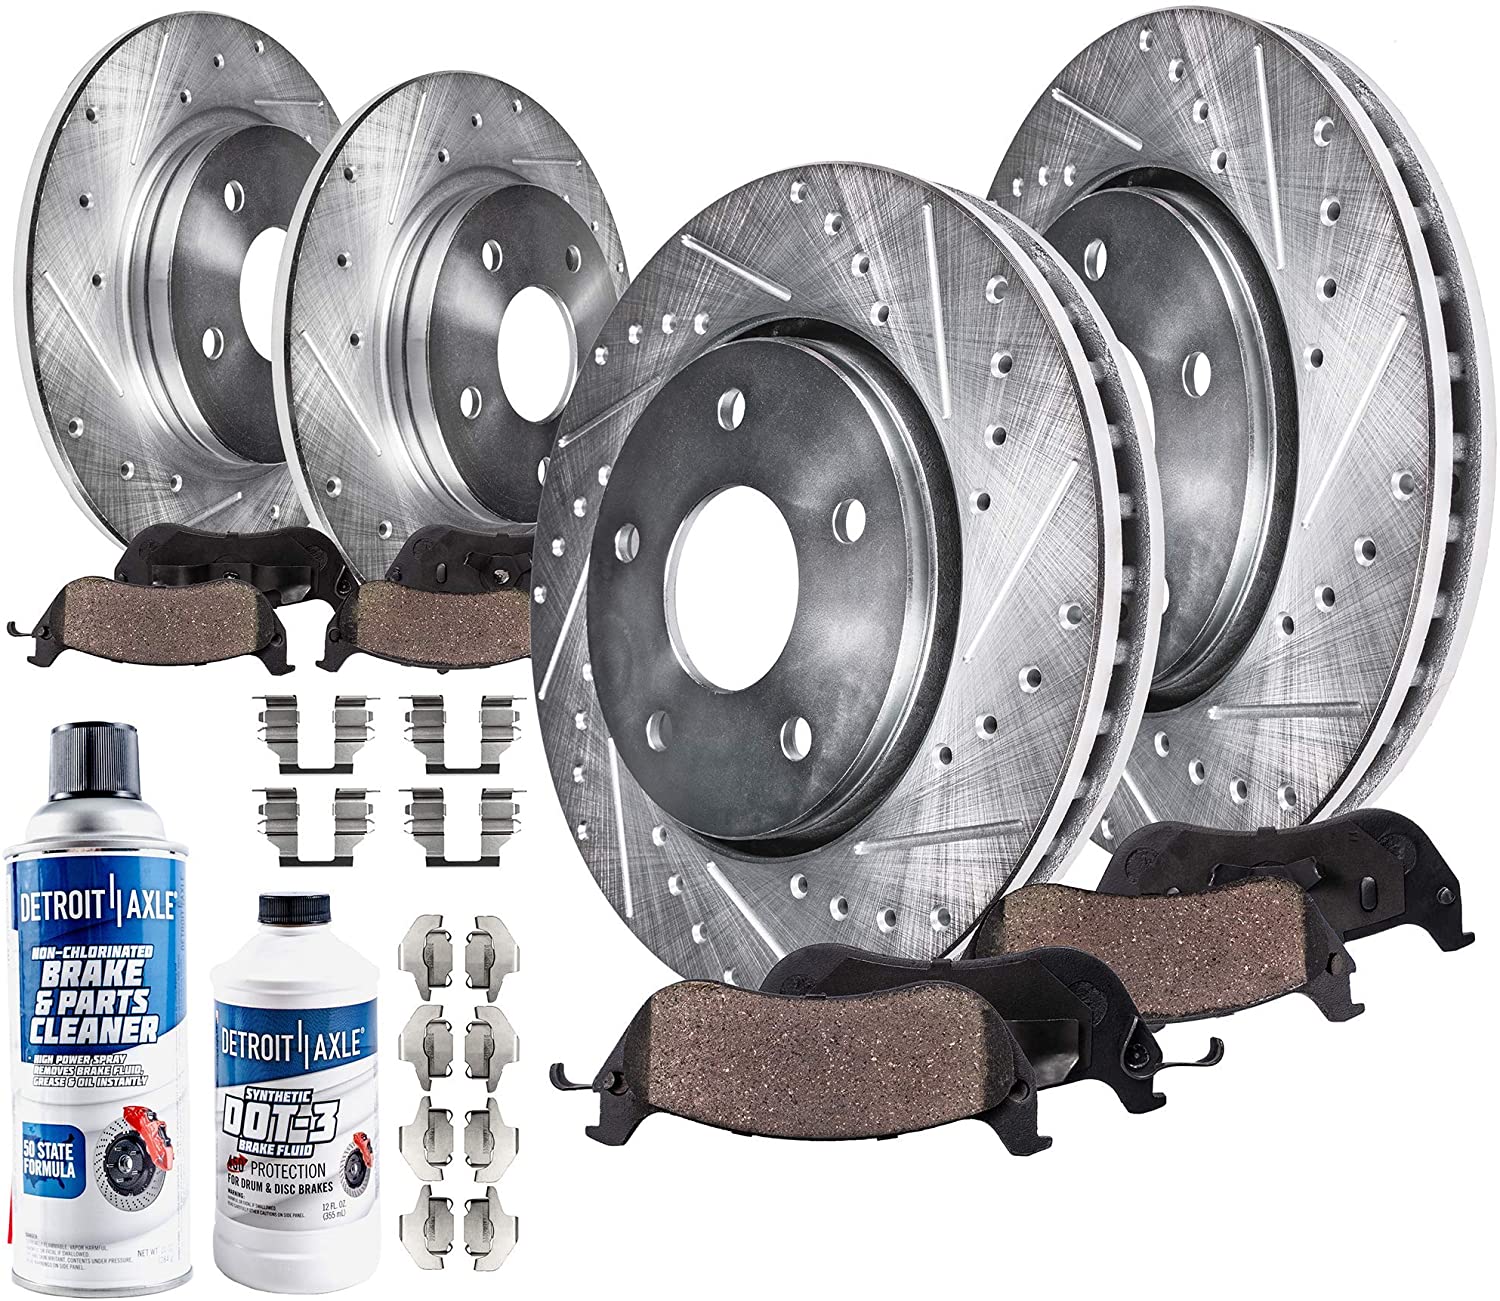 Detroit Axle - All (4) Front and Rear Drilled and Slotted Disc Brake Kit Rotors w/Ceramic Pads w/Hardware & Brake Kit Cleaner & Fluid for 2000 2001 2002 2003 Ford F-150-4x4 4WD 5 Lug